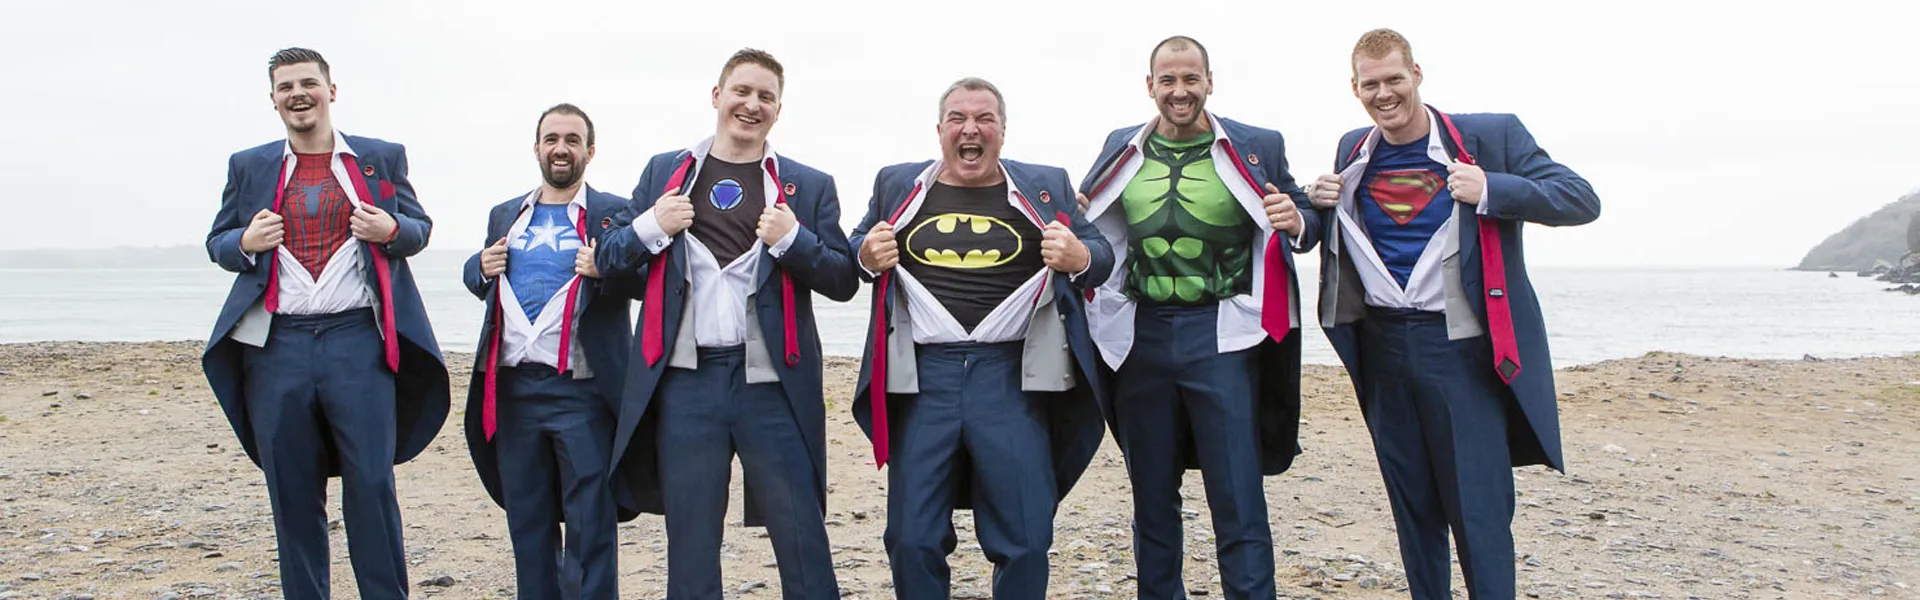 Groomsmen reveal superhero t-shirts under their wedding attire, adding a playful touch to the celebration